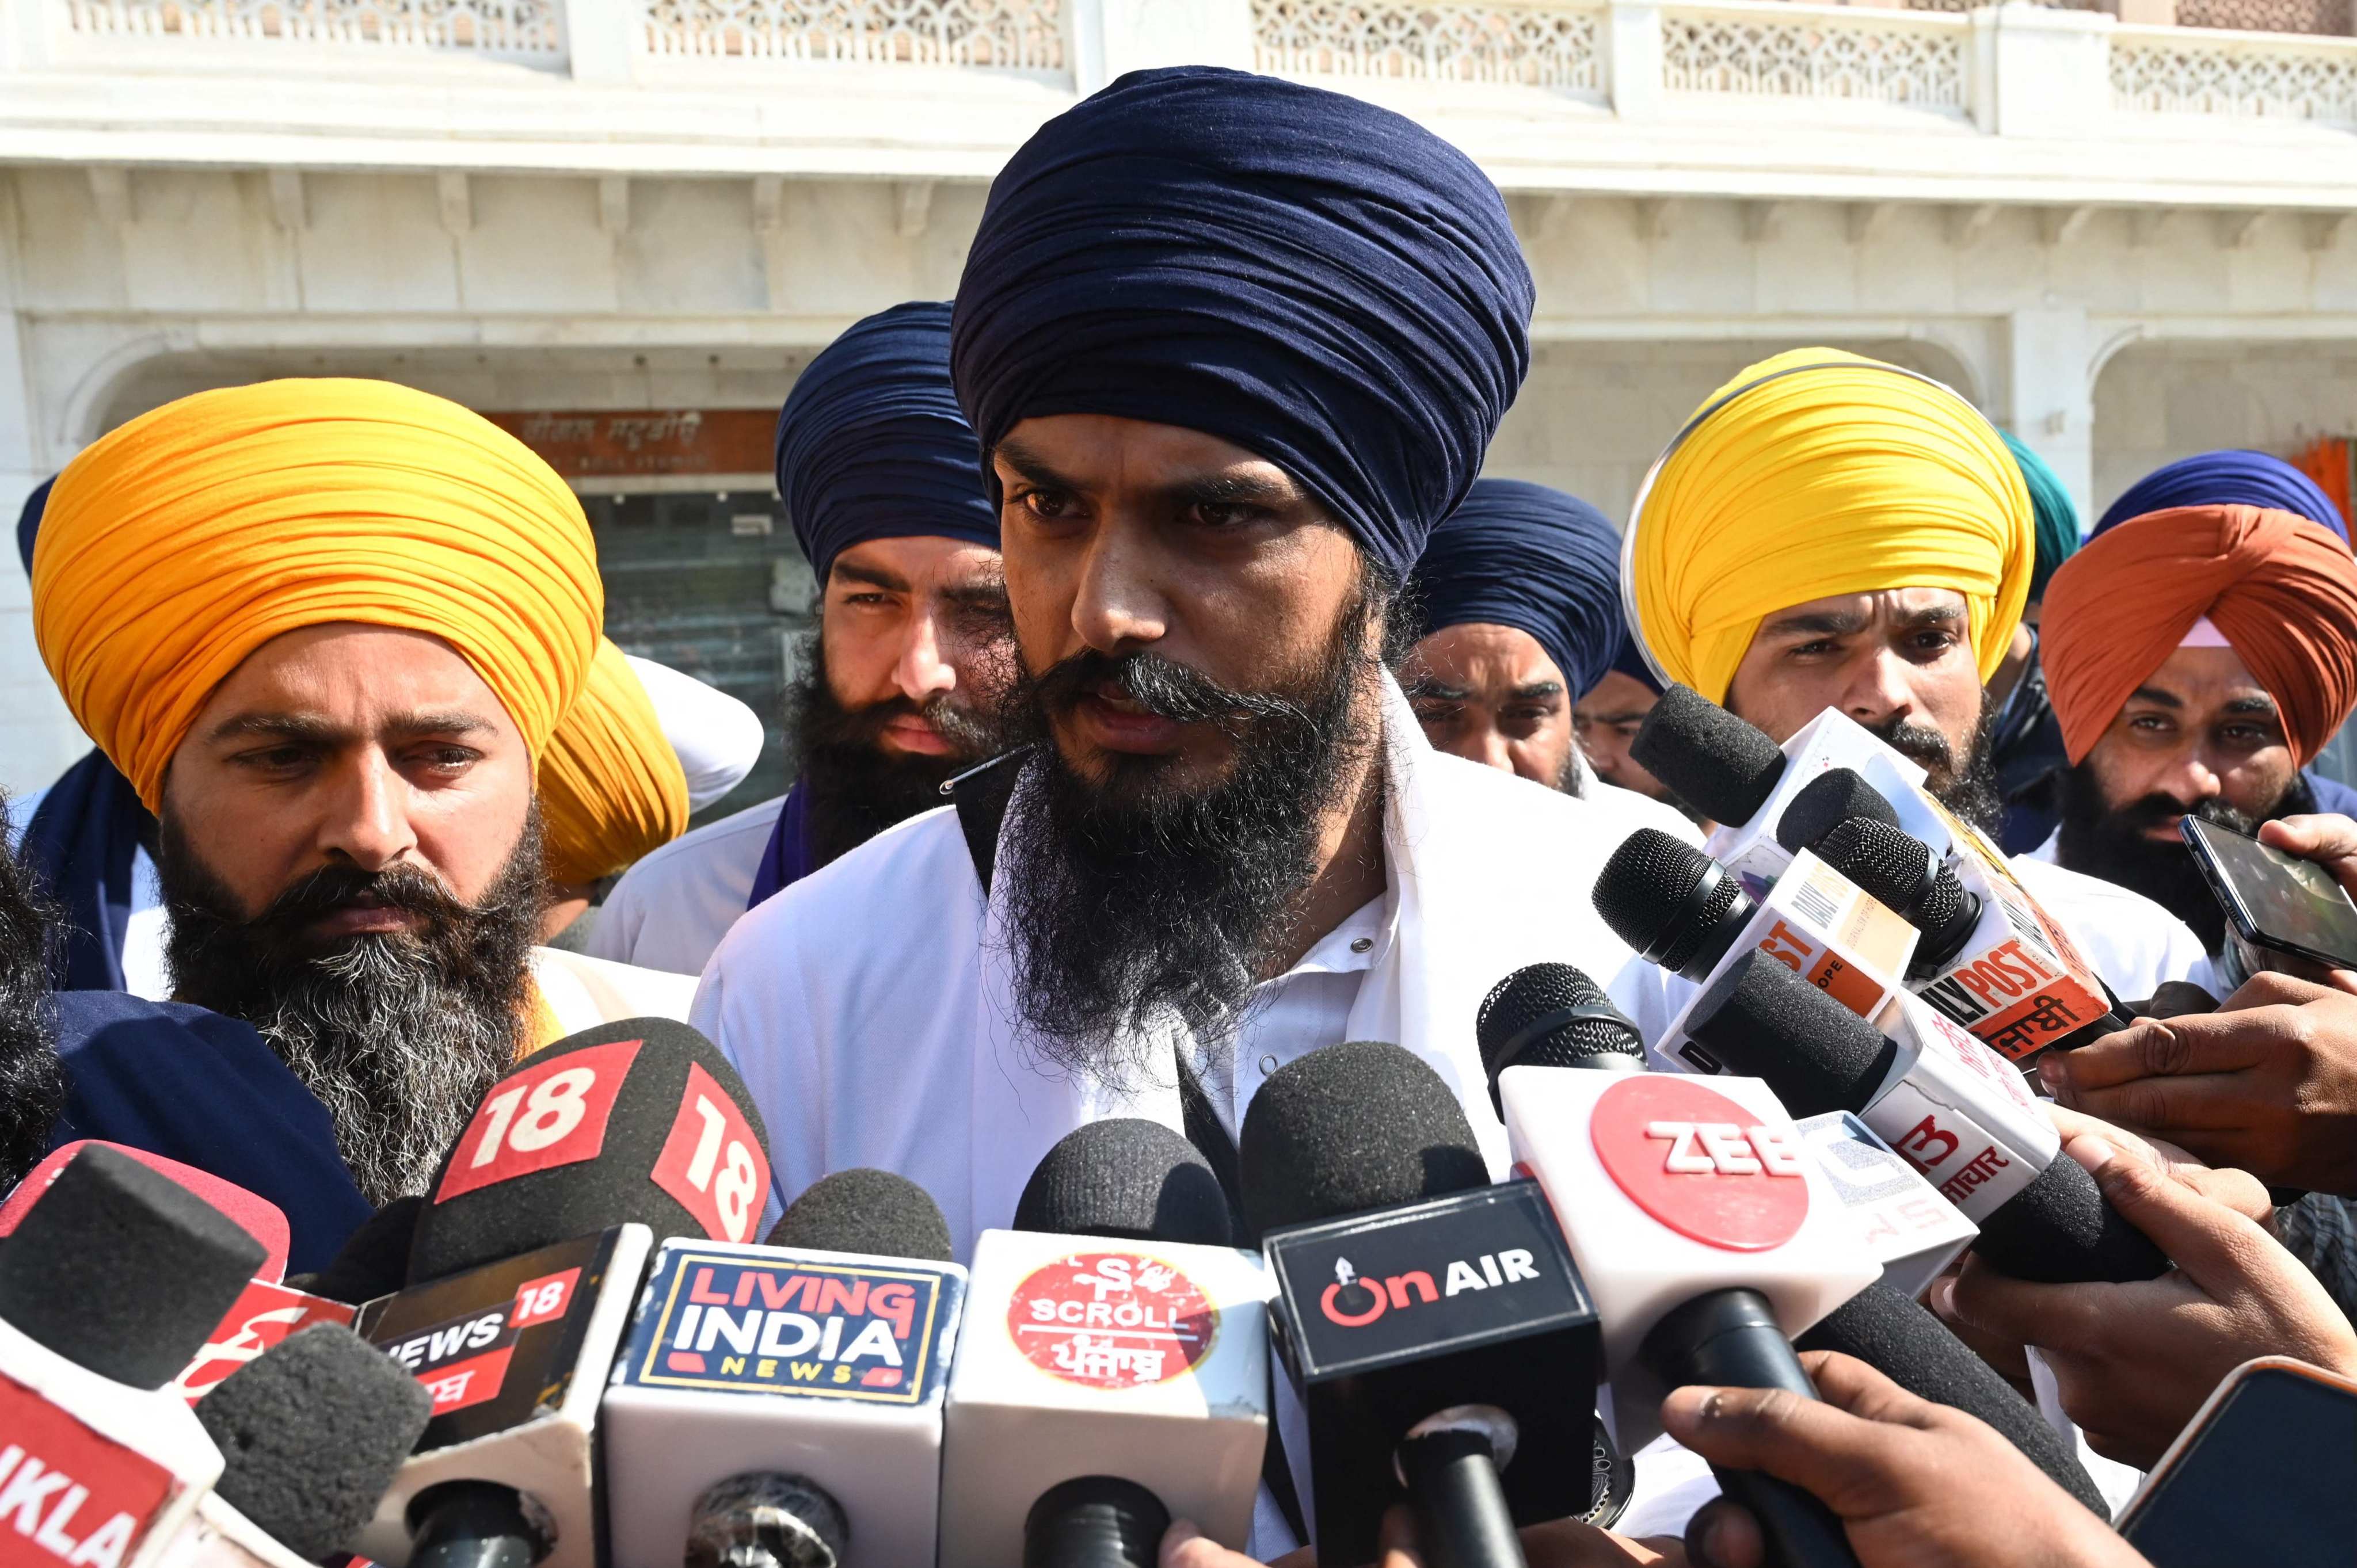 ‘Waris Punjab De’ chief Amritpal Singh, centre, speaks to the media, at the Golden Temple in Amritsar, India. Photo: AFP